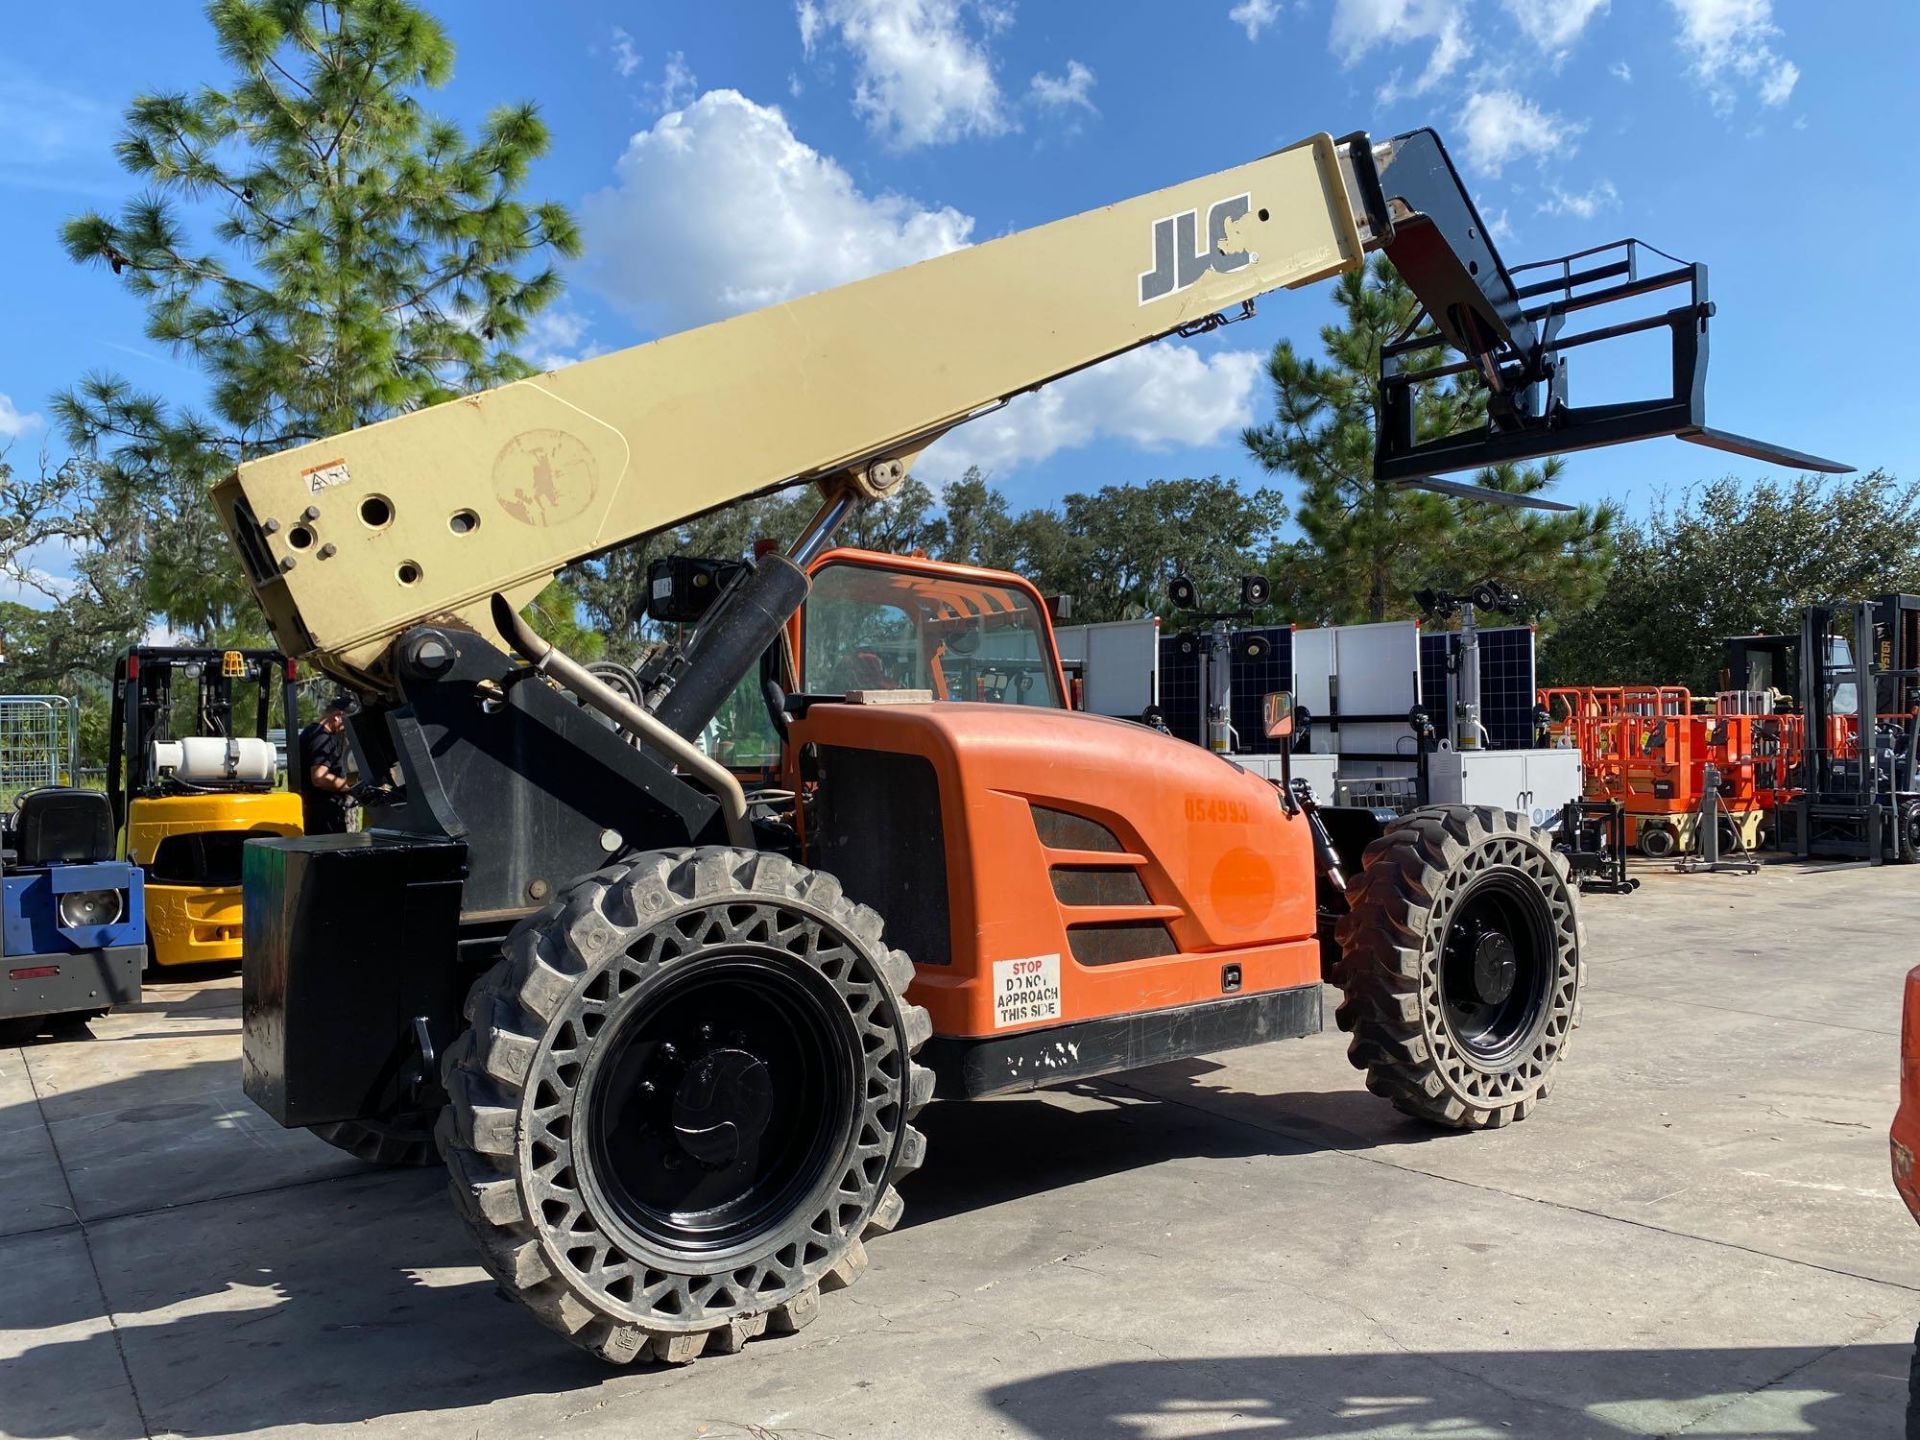 2013 JLG TELESCOPIC FORKLIFT MODEL G9-43A, DIESEL, 4X4,9,000LB CAPACITY, 43' REACH RUNS AND OPERATES - Image 11 of 13